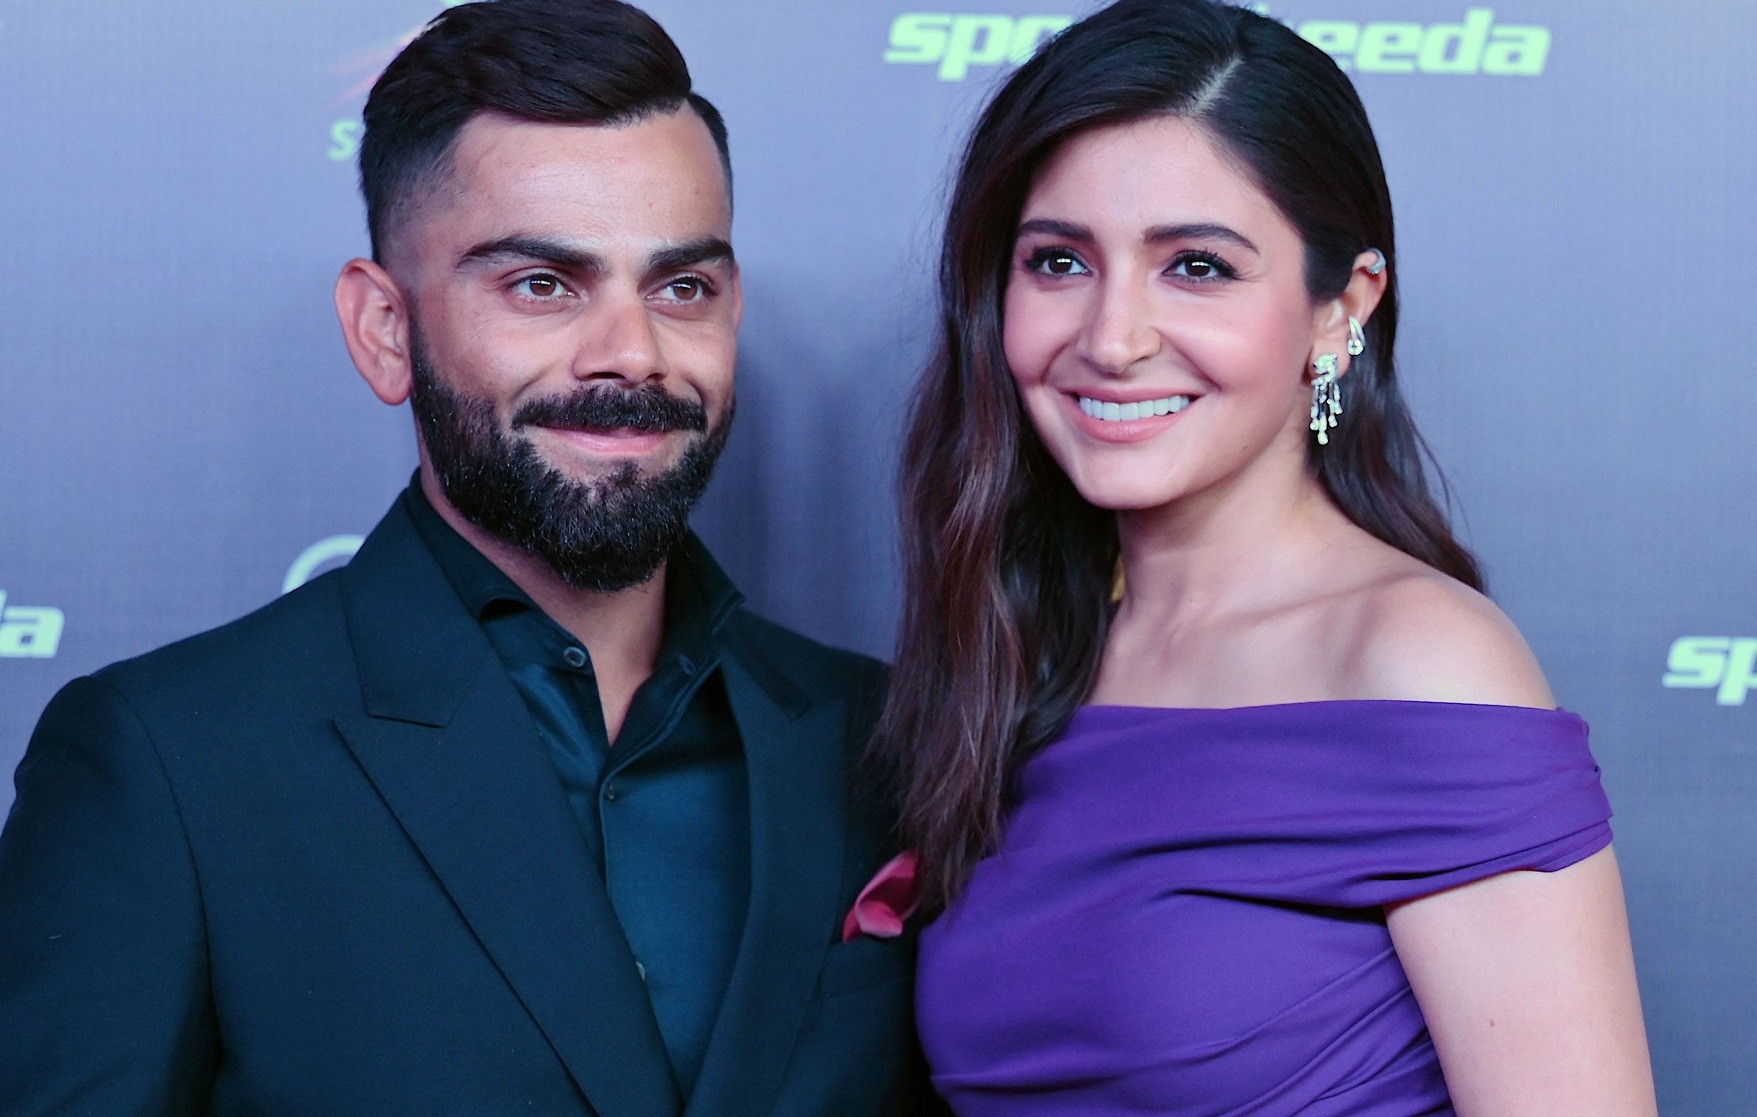 Kohli ends speculation over absence with baby announcement